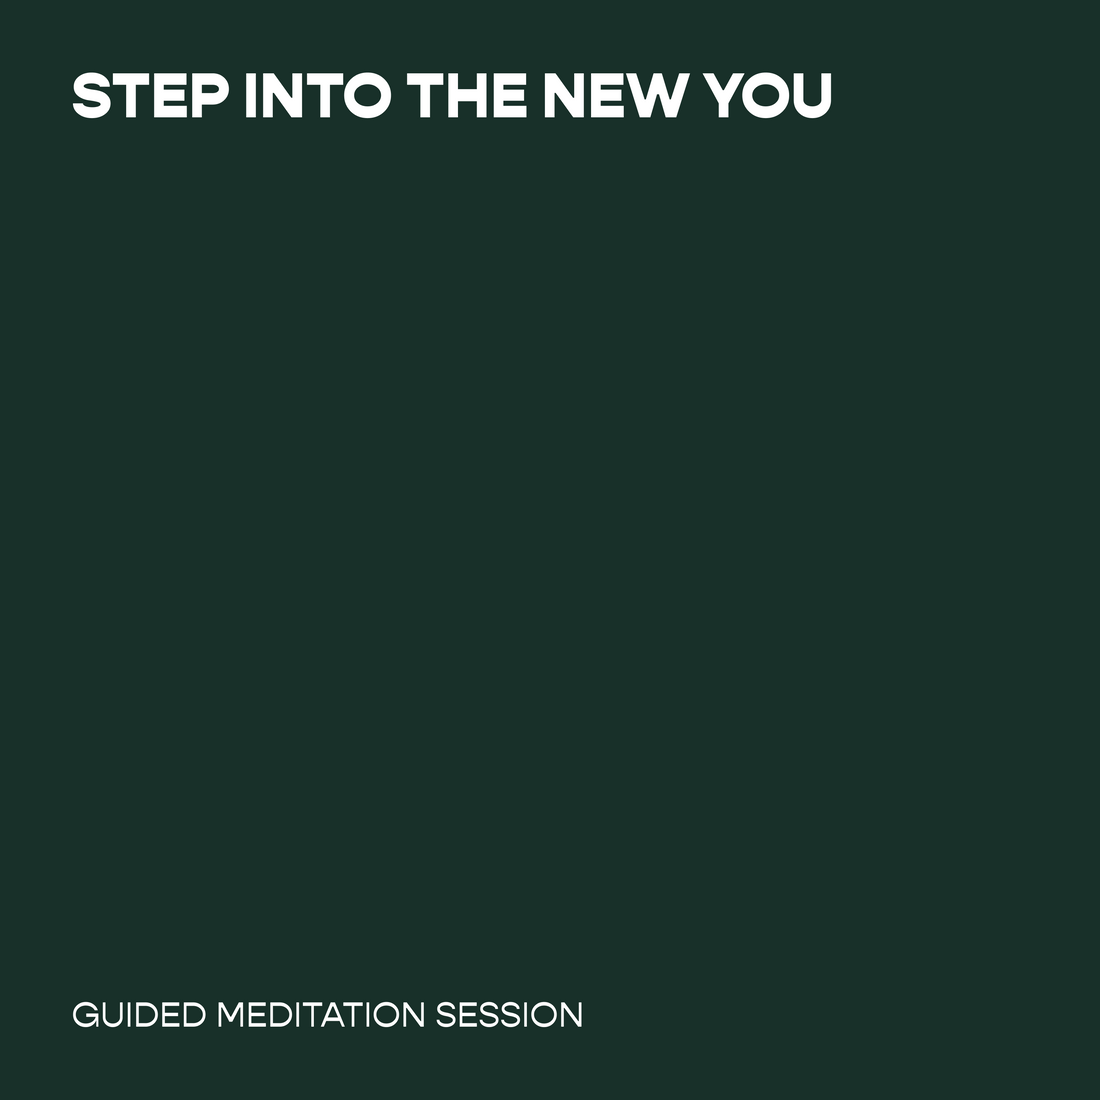 Step into the New You